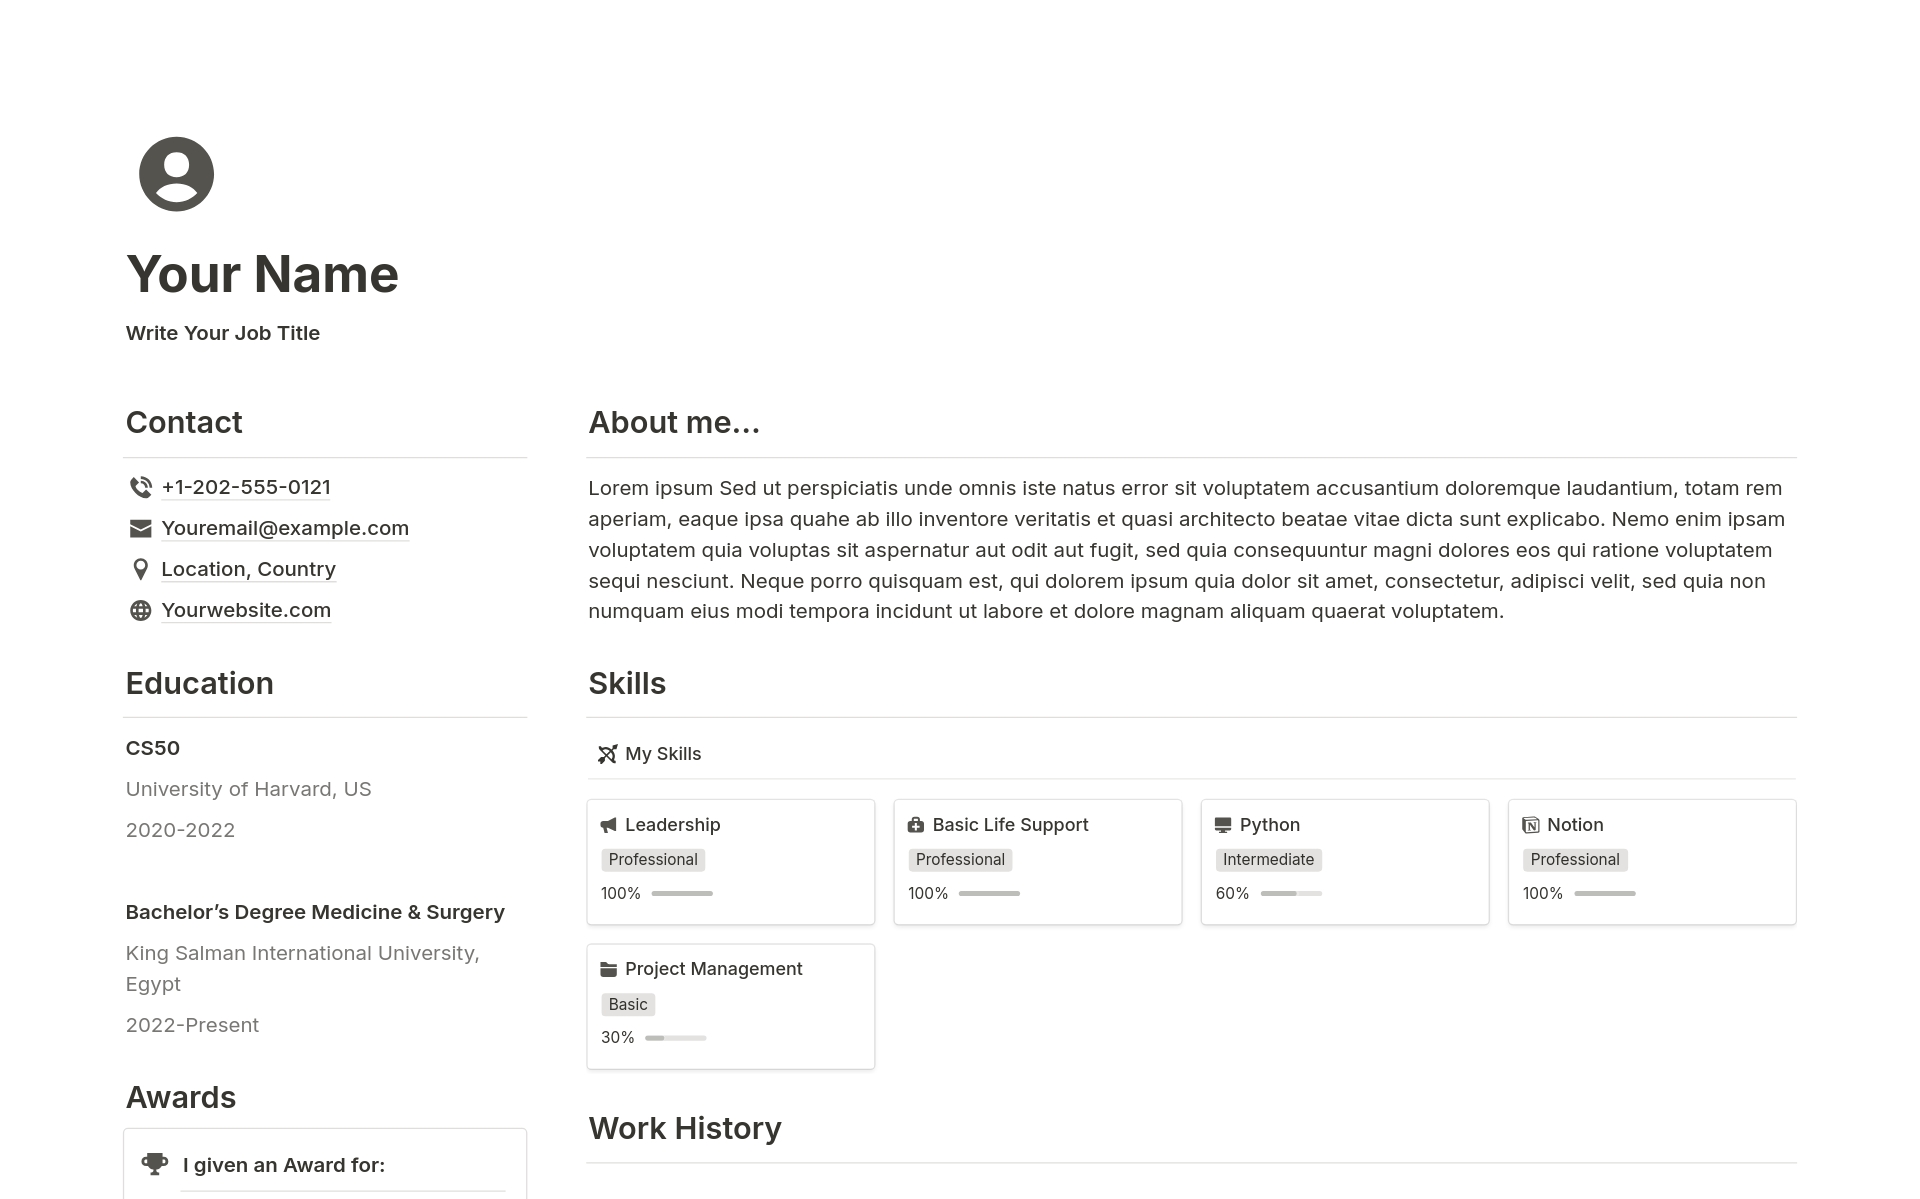 Ready to stand out in your job search? Meet the Minimalist Resume Notion Template—an eye-catching, easy-to-customize tool designed to get you noticed. With sections for Work History, Languages, Skills, Education, Rewards, and Contact, it's your ticket to showcasing your potential